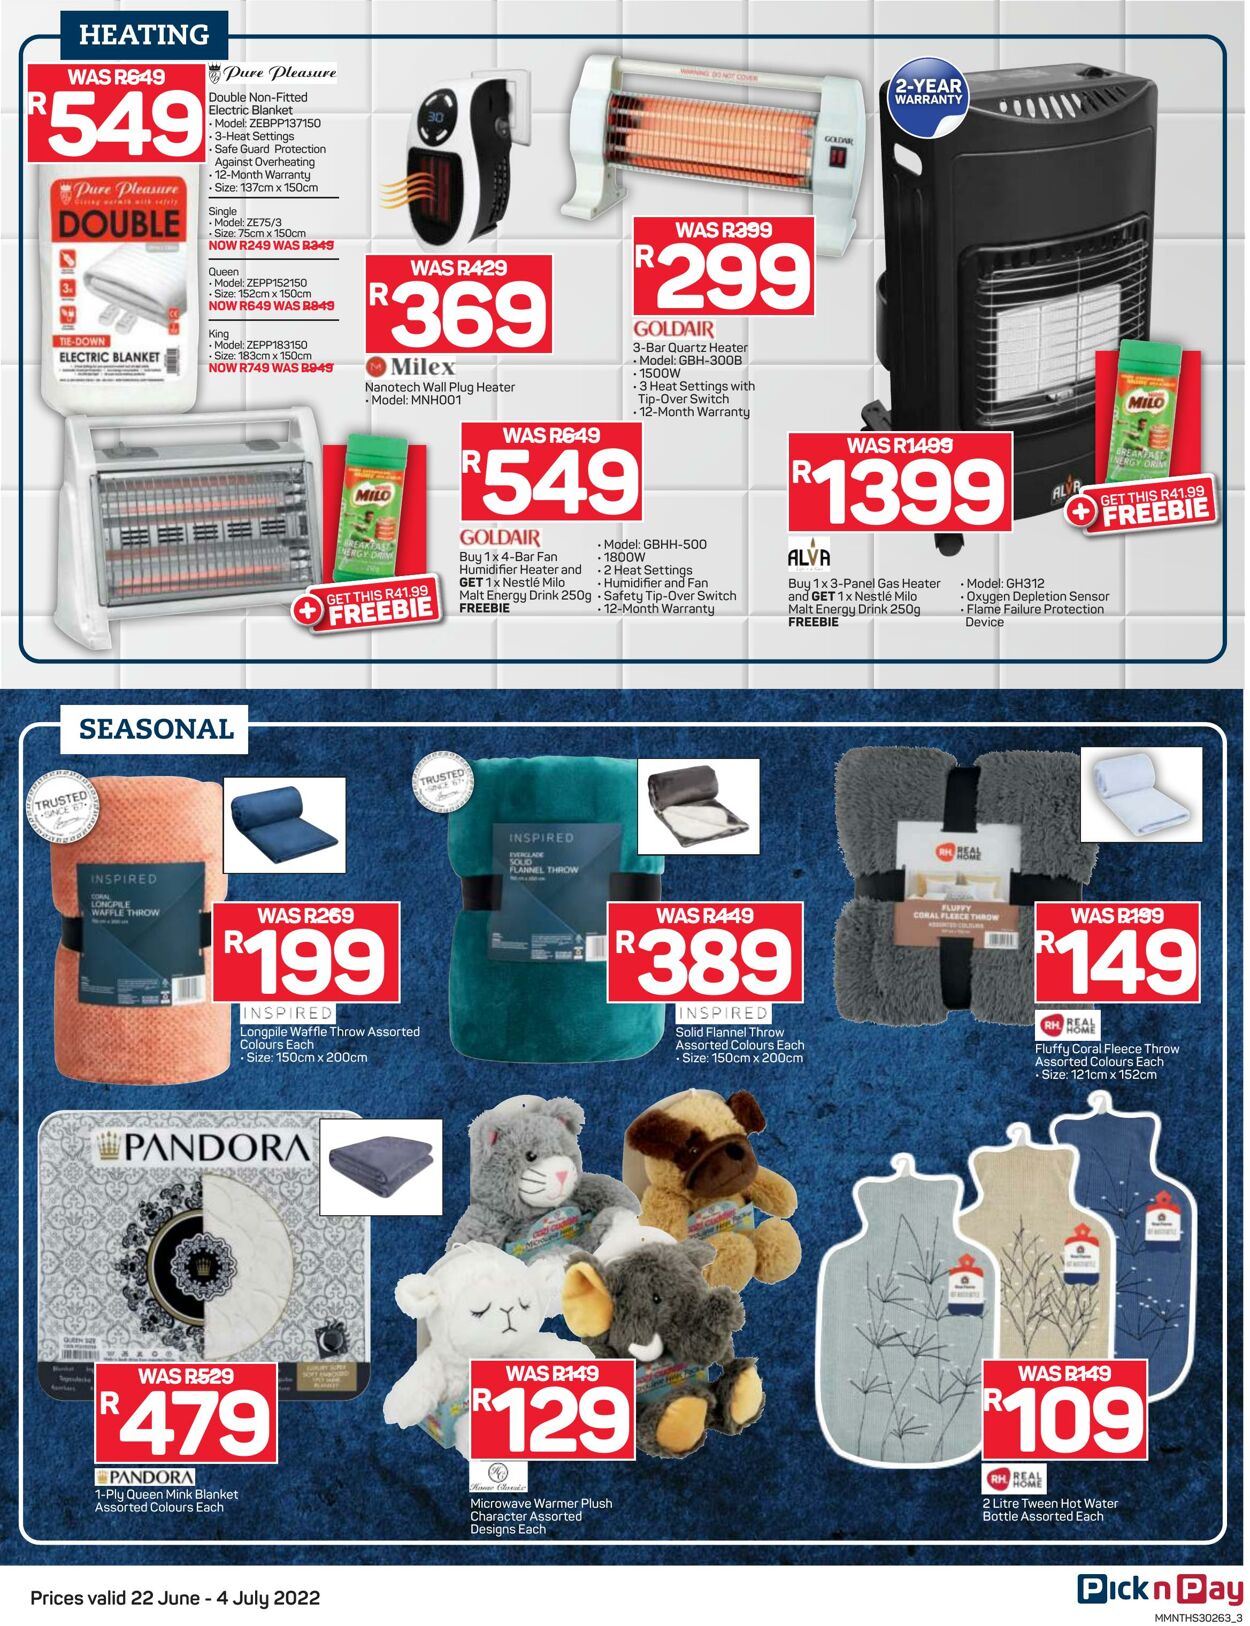 Special Pick n Pay 22.06.2022 - 04.07.2022